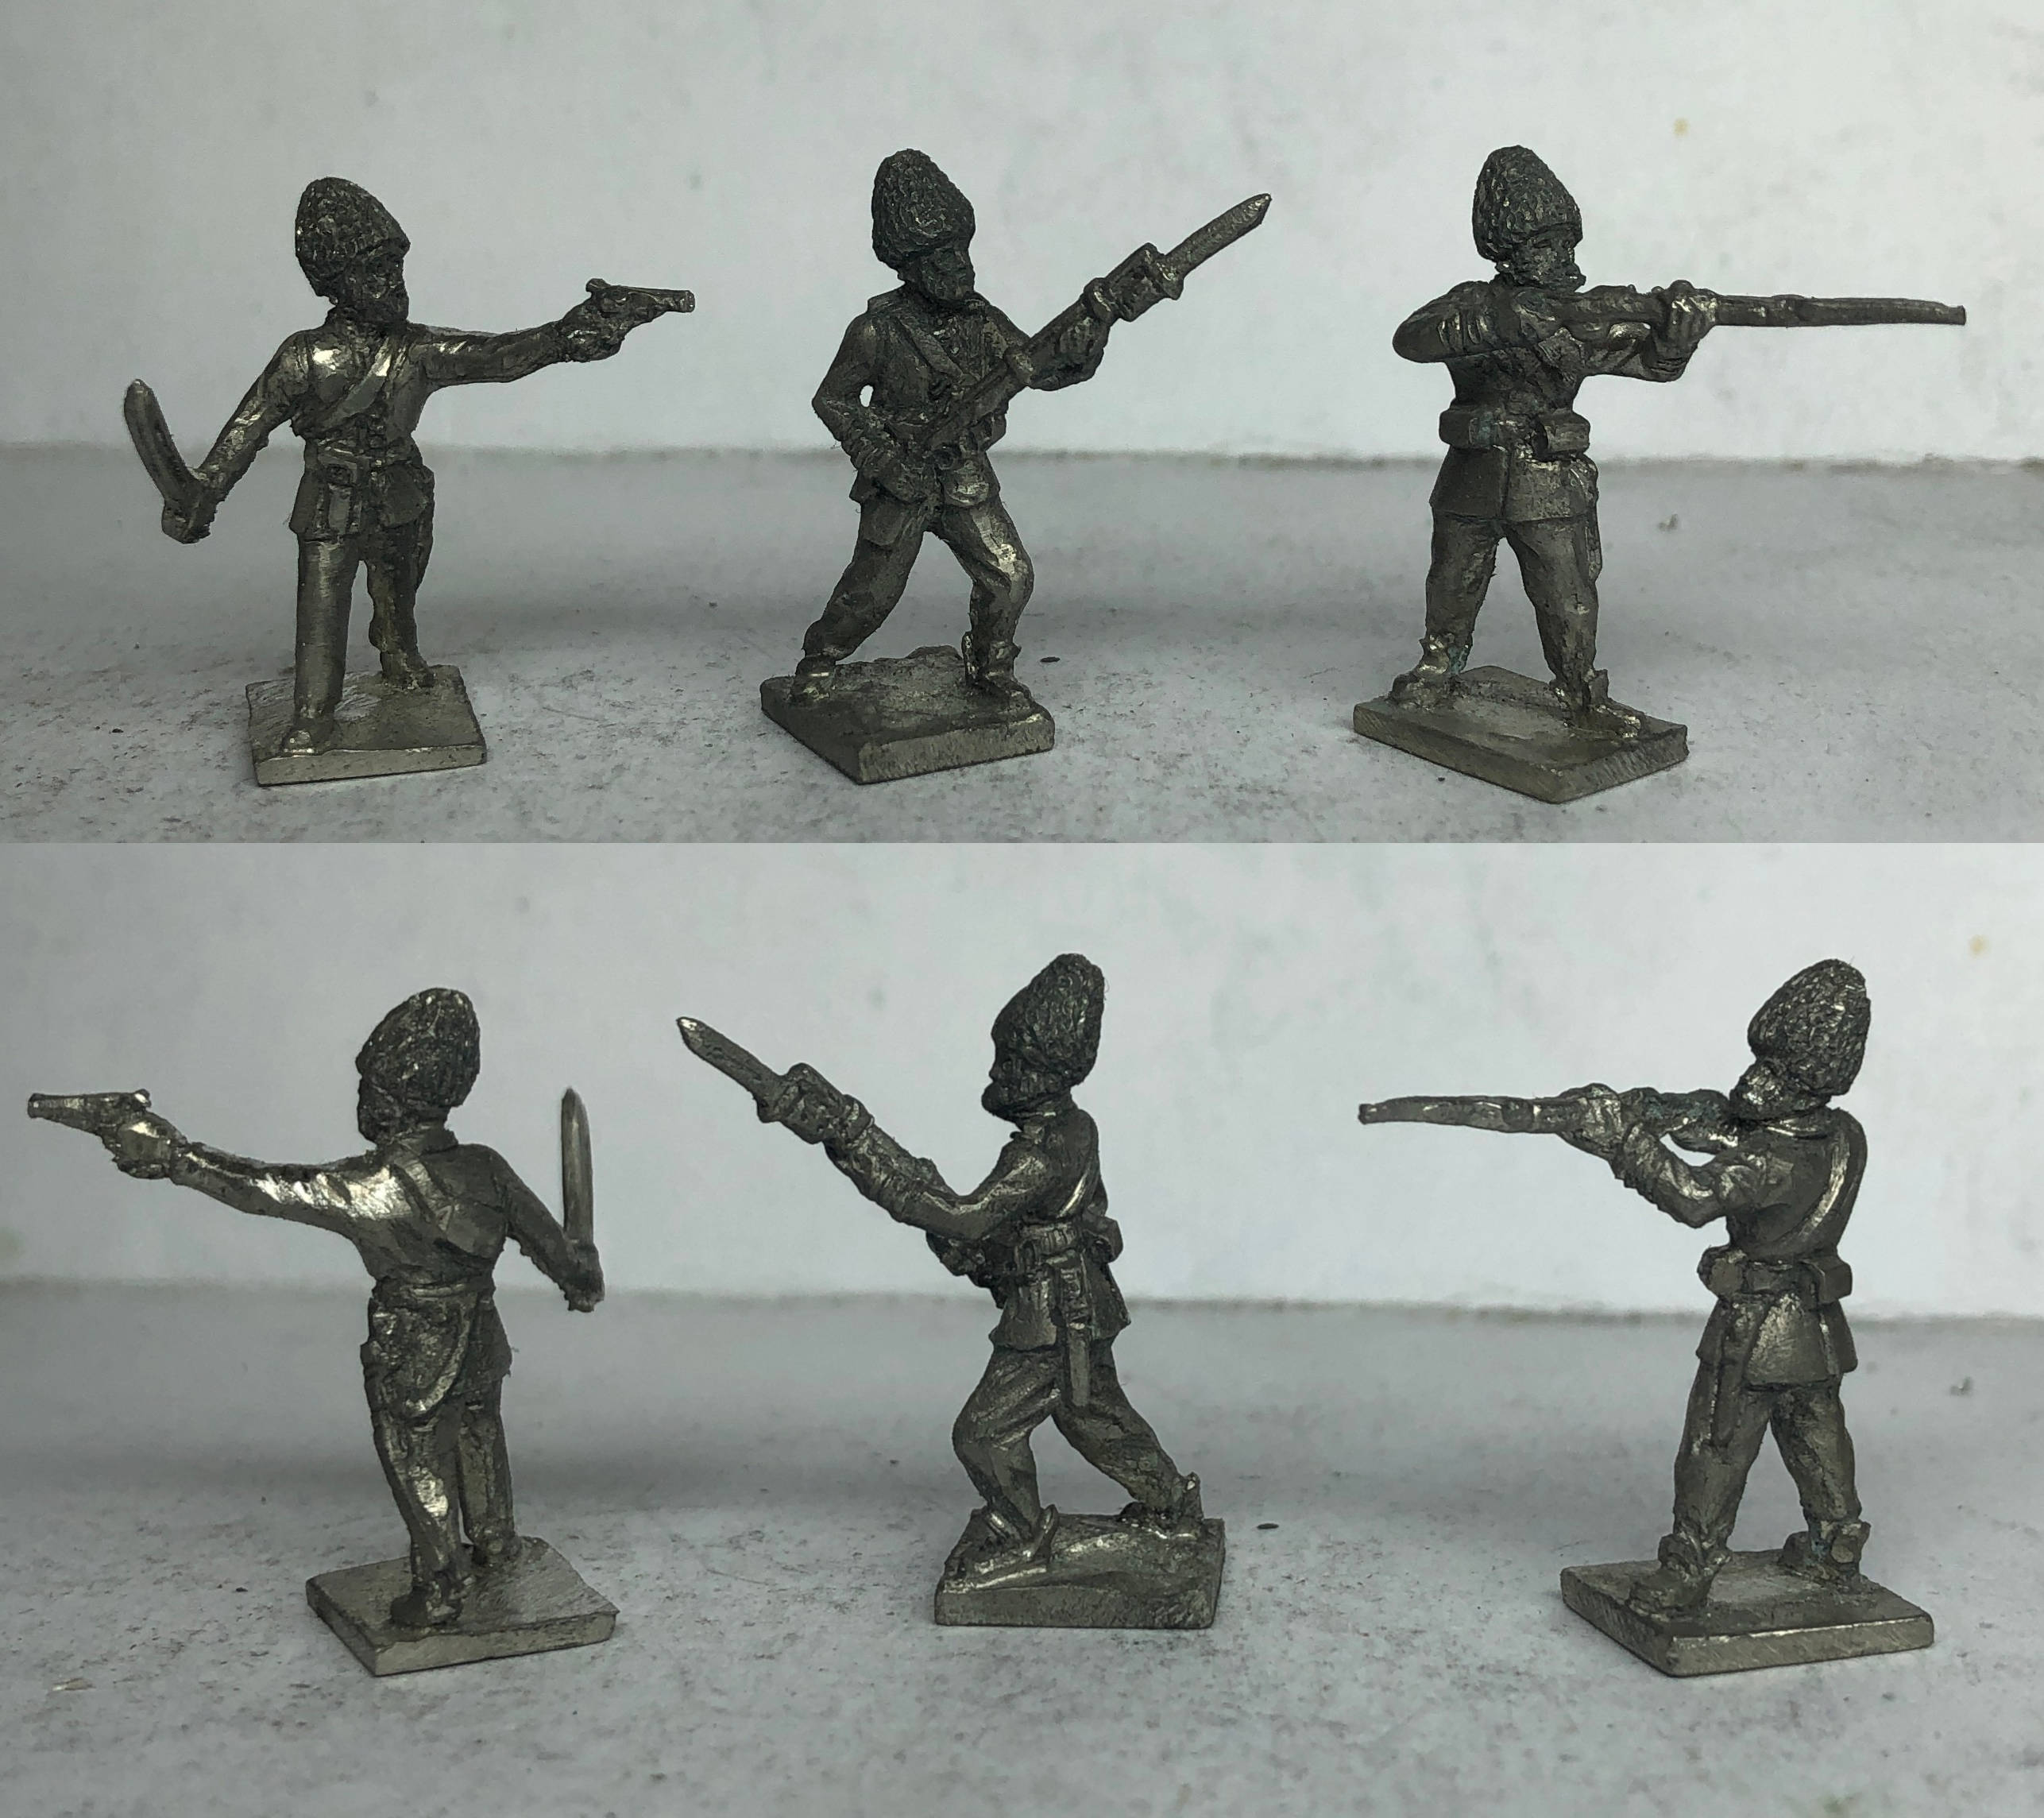  NEW AFGHAN ARMY FIGURES AVAILABLE VERY SOON  